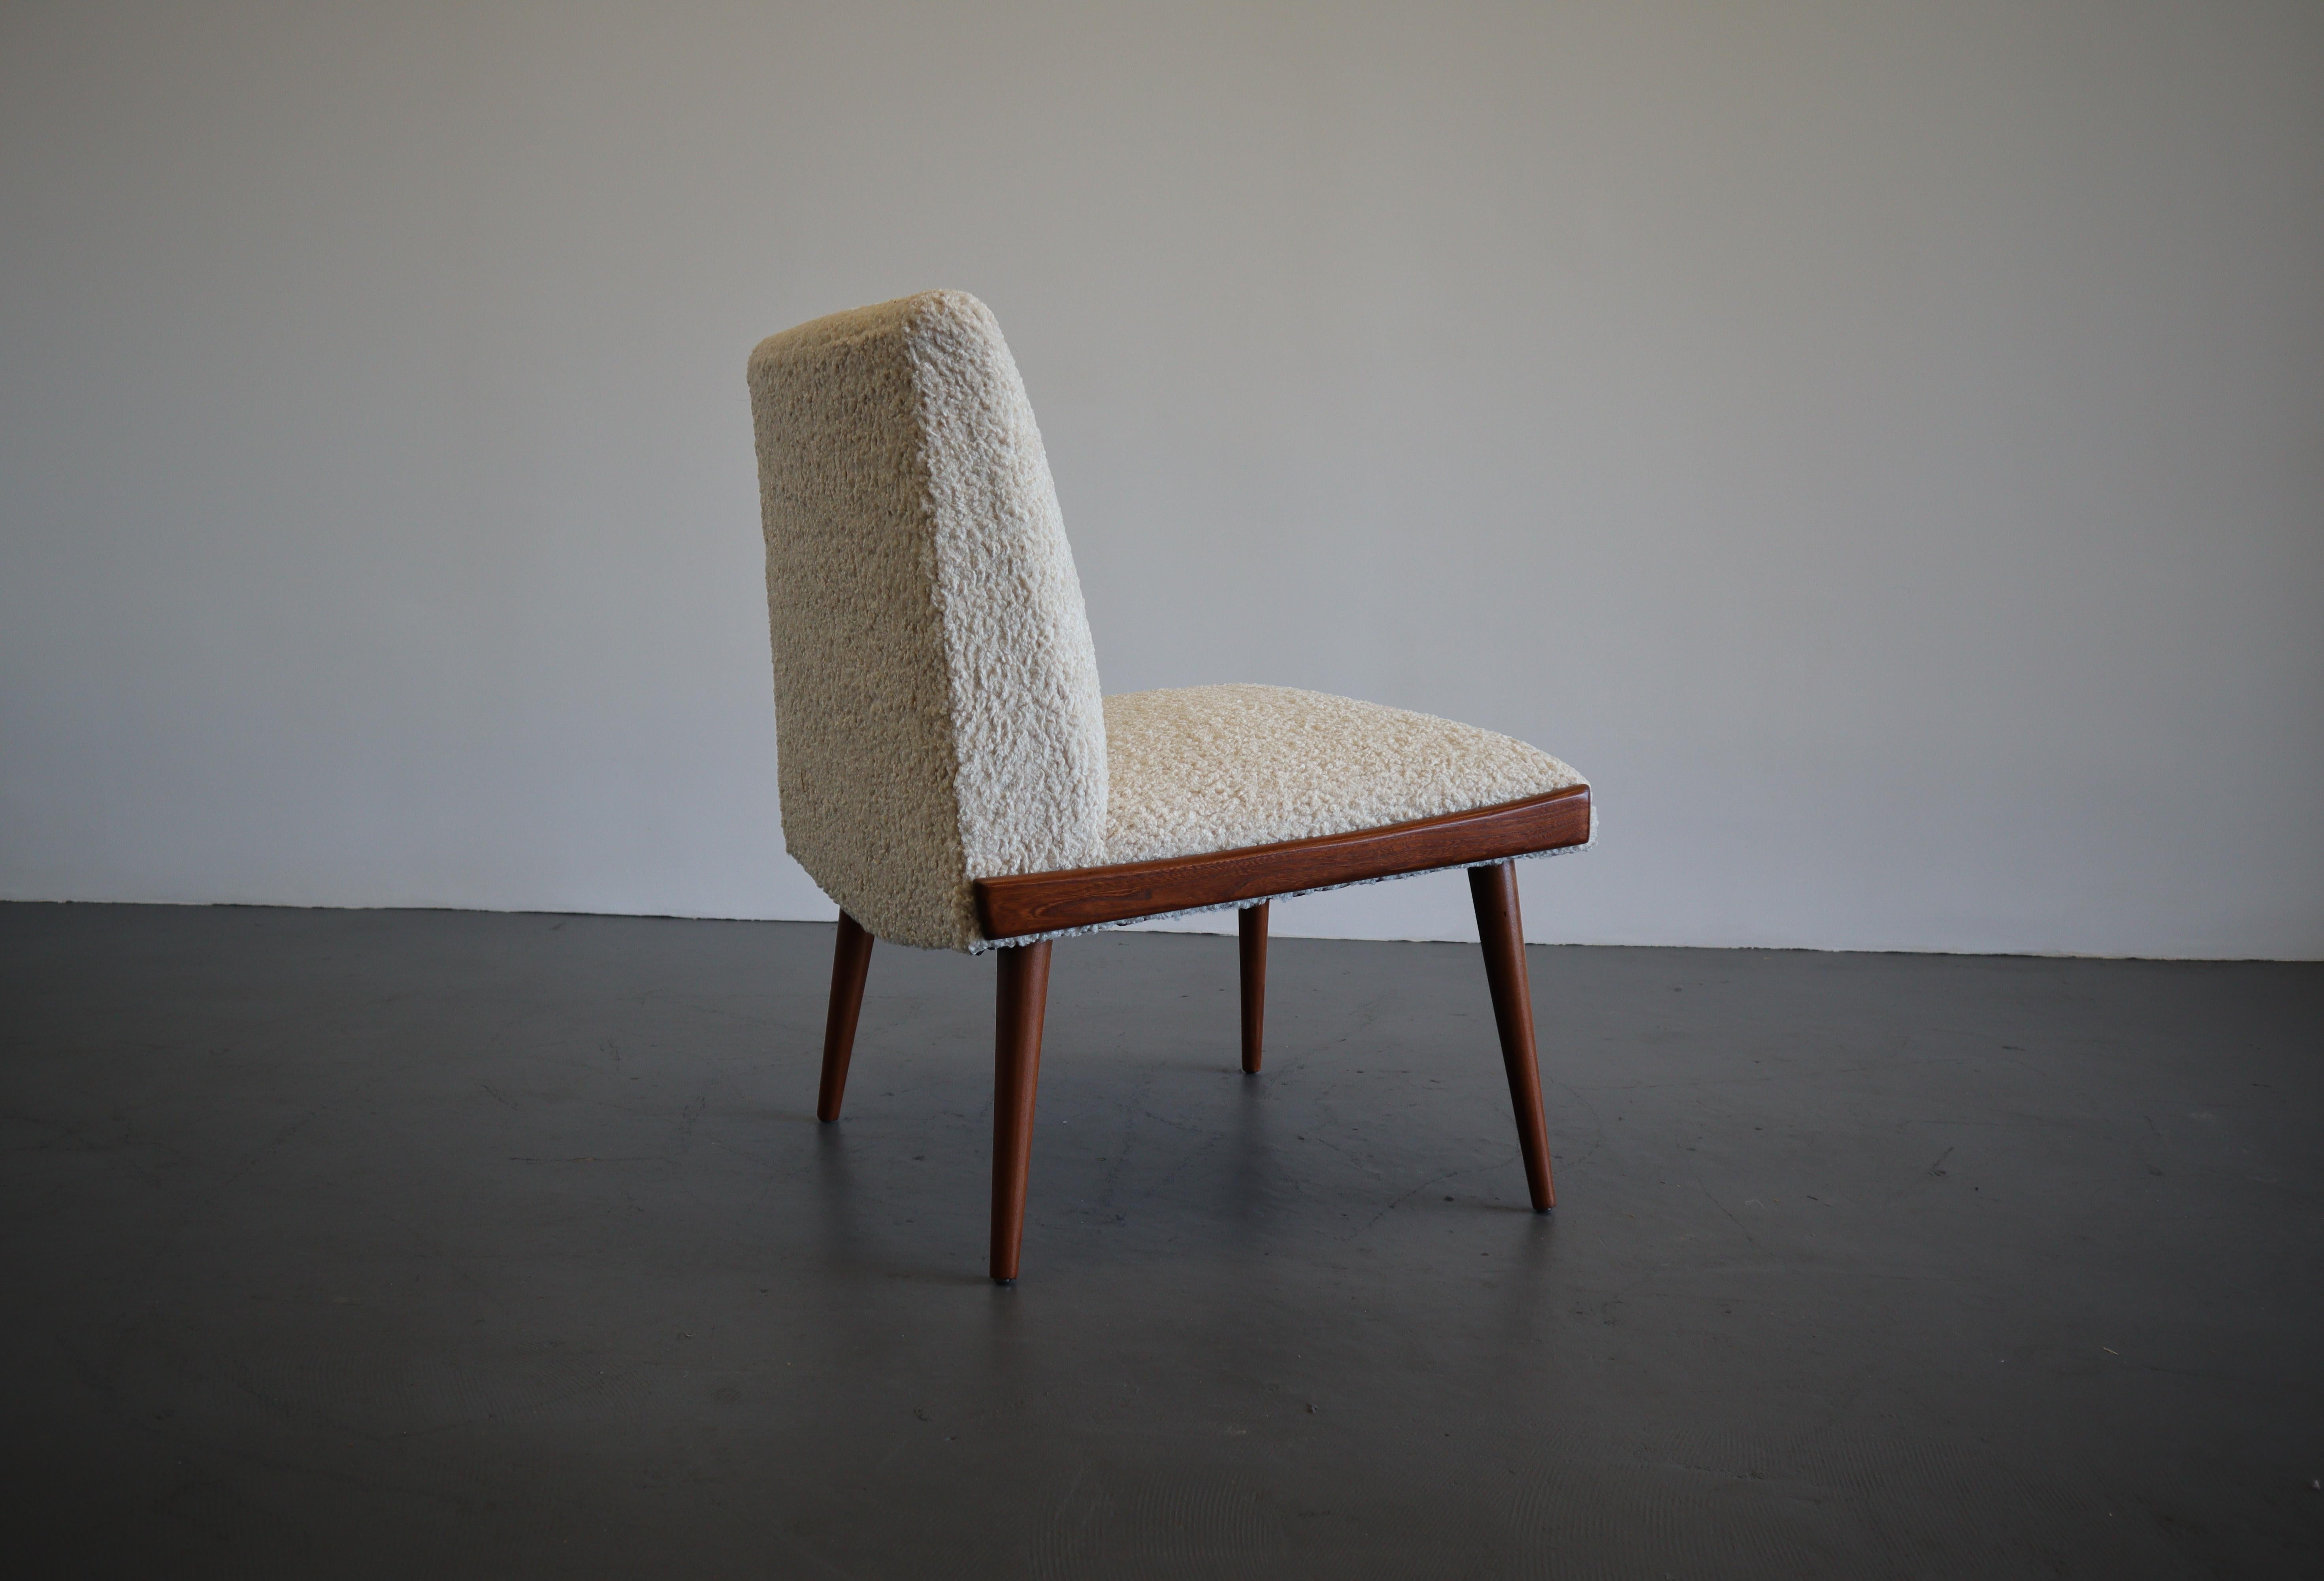 A beautiful single side chair by Kroehler. Sumptuous tailored boucle upholstery oozes luxury and comfort. A classic design that has endured and continues to prevail as an iconic mid century modern staple.